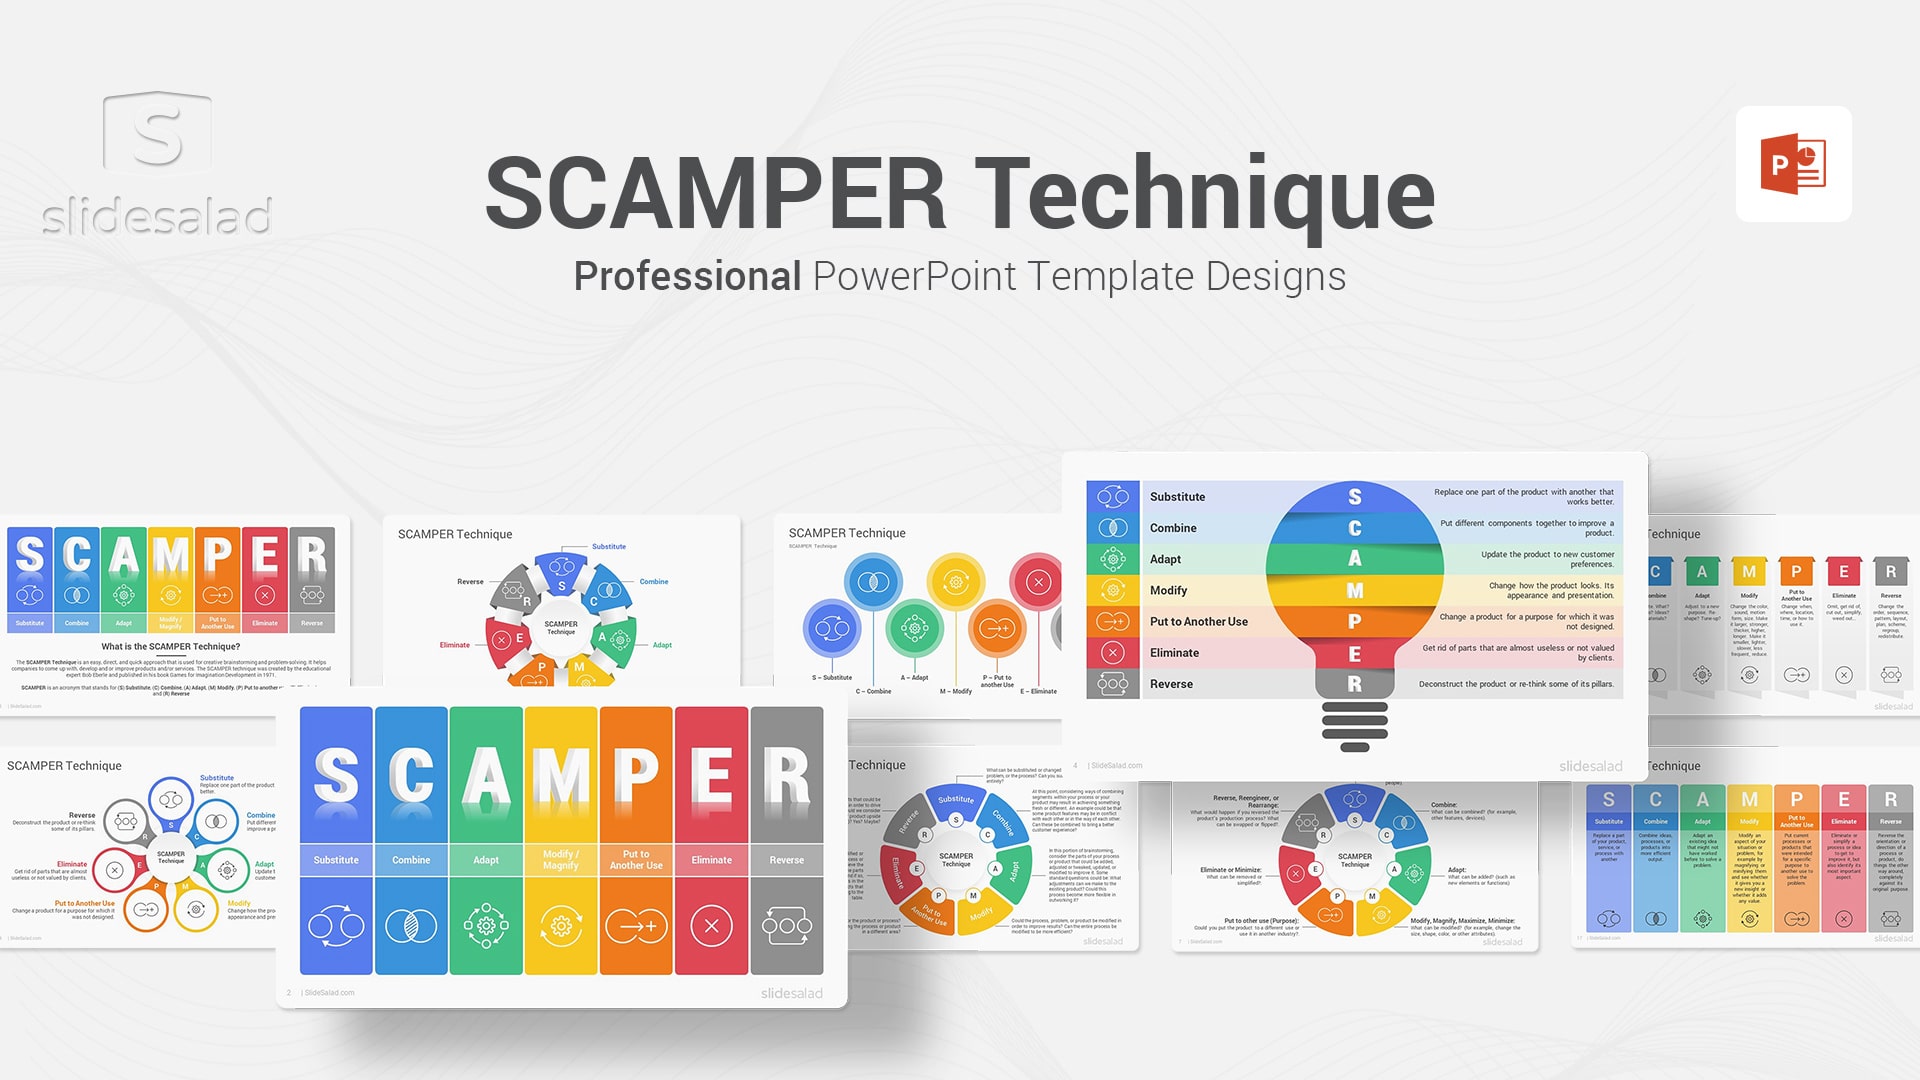 SCAMPER Technique PowerPoint Template Designs - Powerful Creative Tool to Create New Ideas Using This Proven Technique